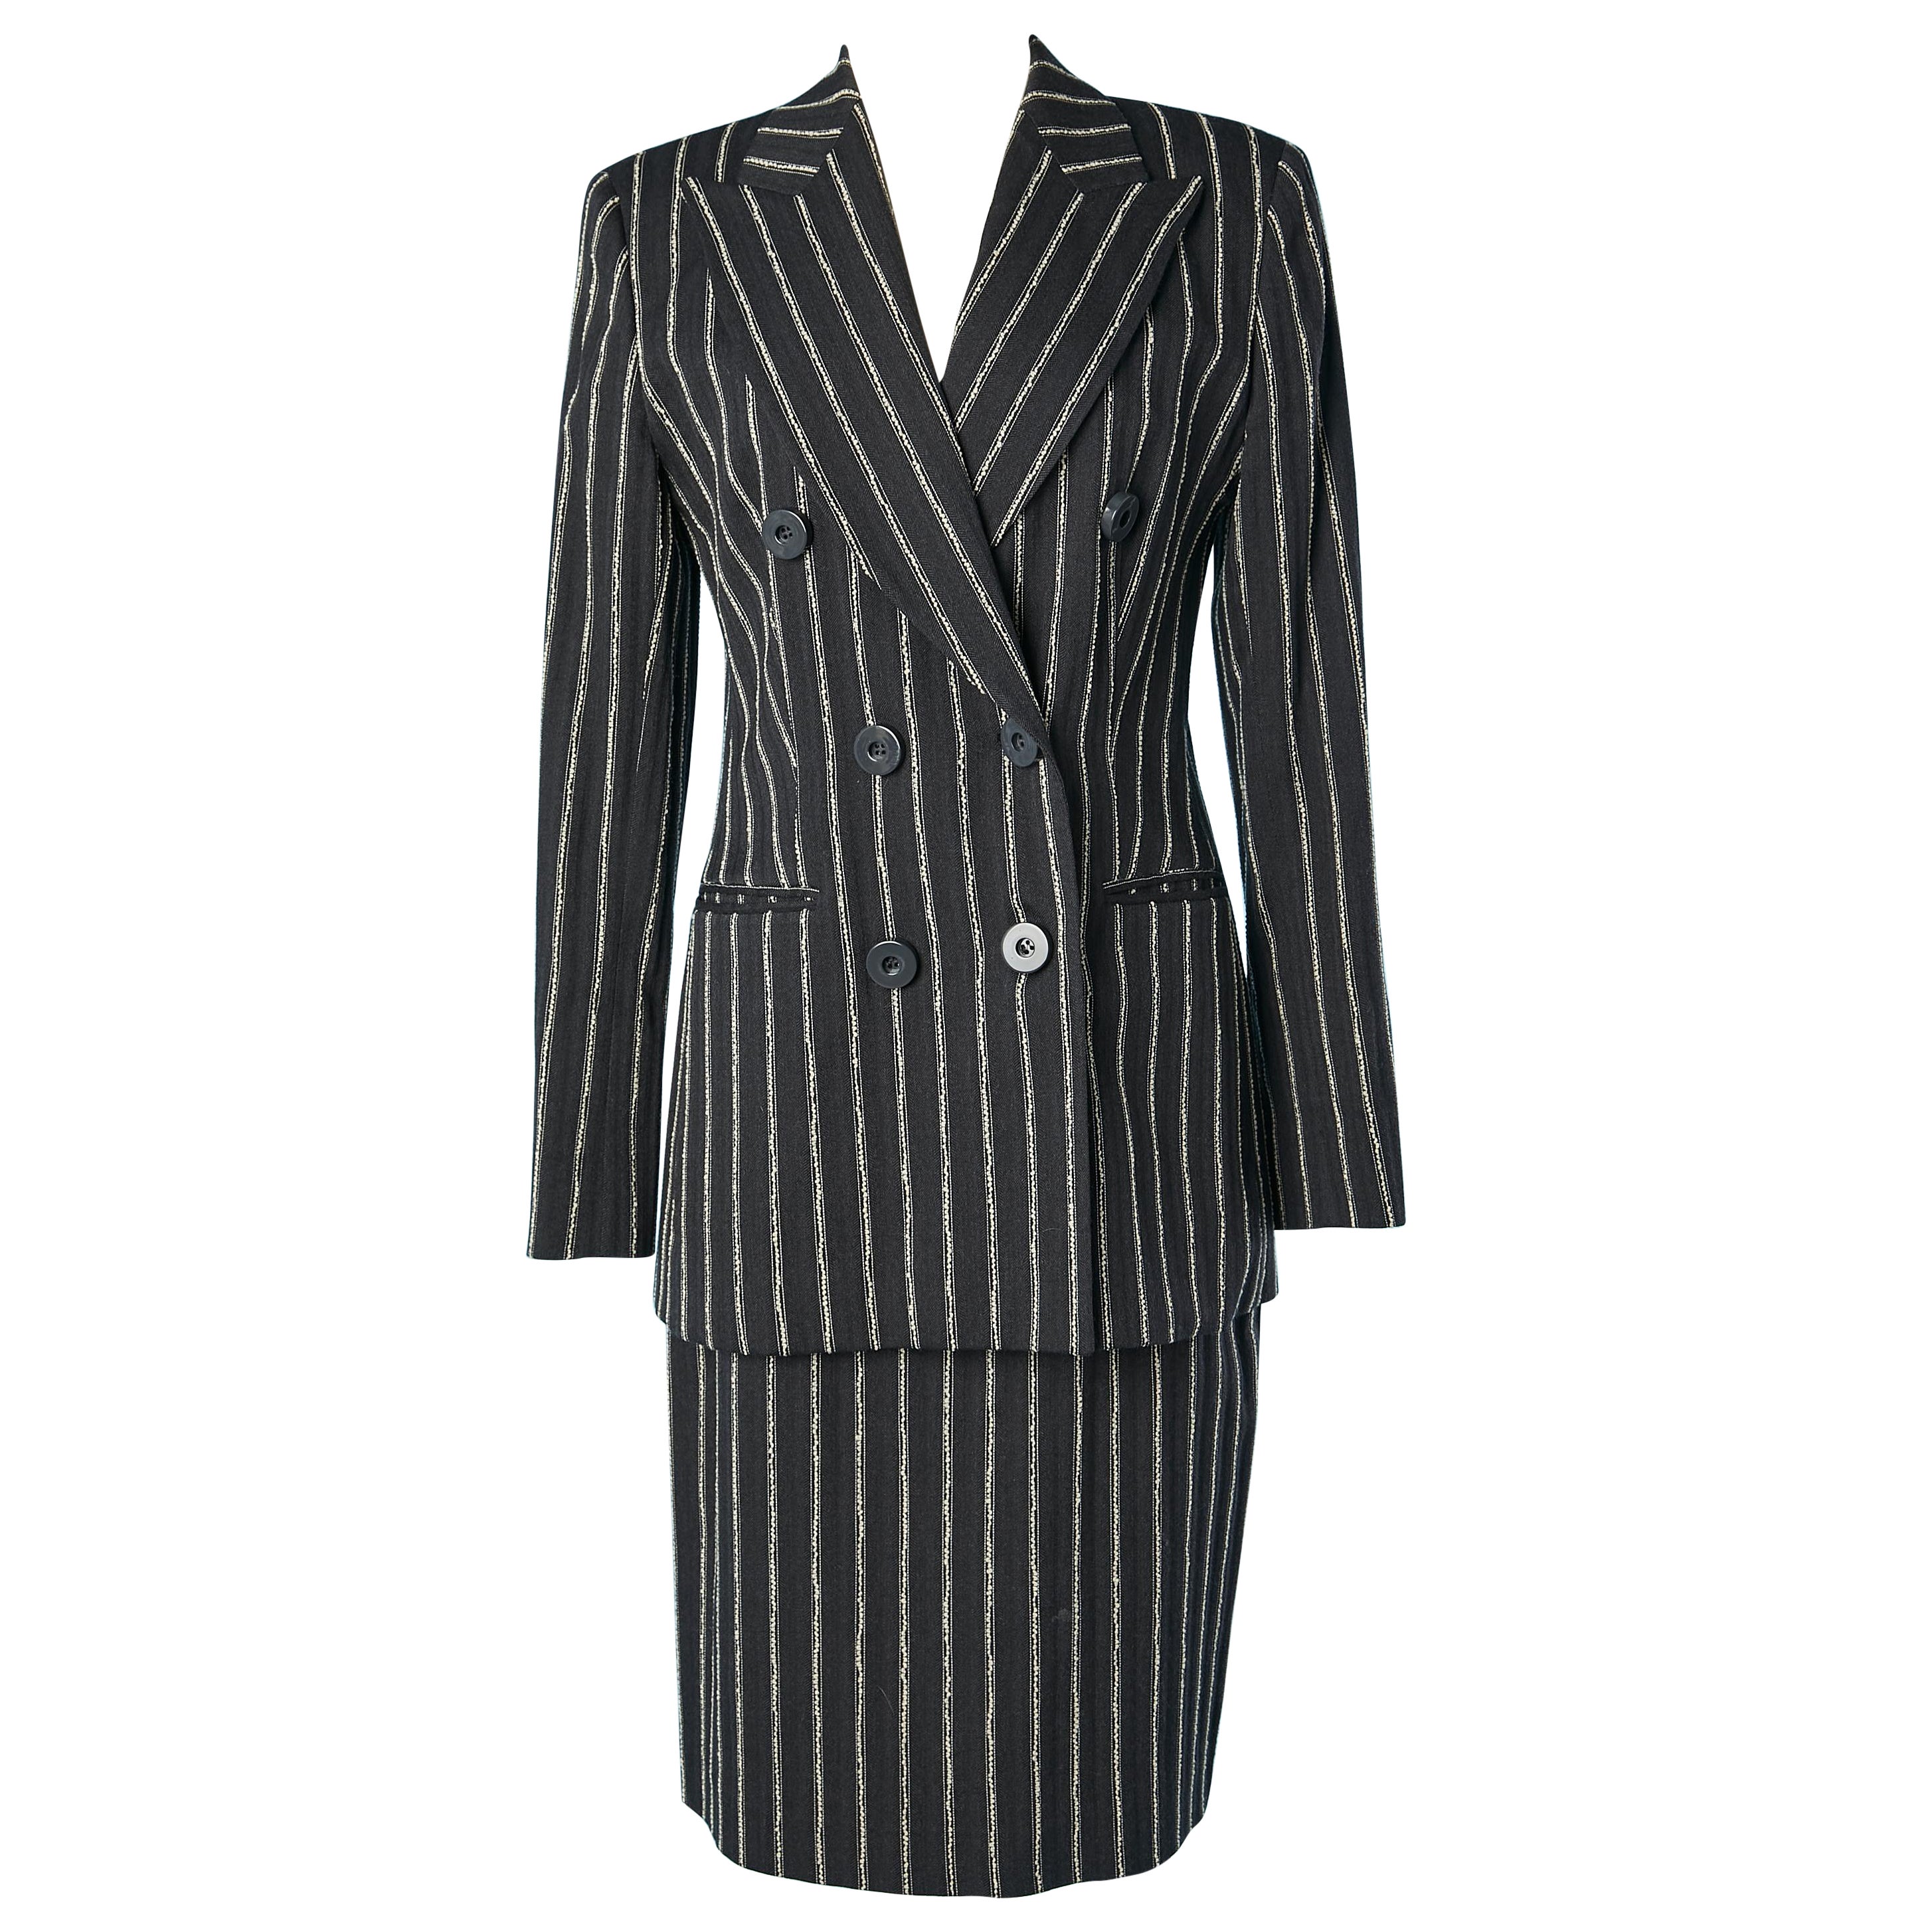 Anthracite striped wool and cotton double-breasted skirt suit Studio Ferré 